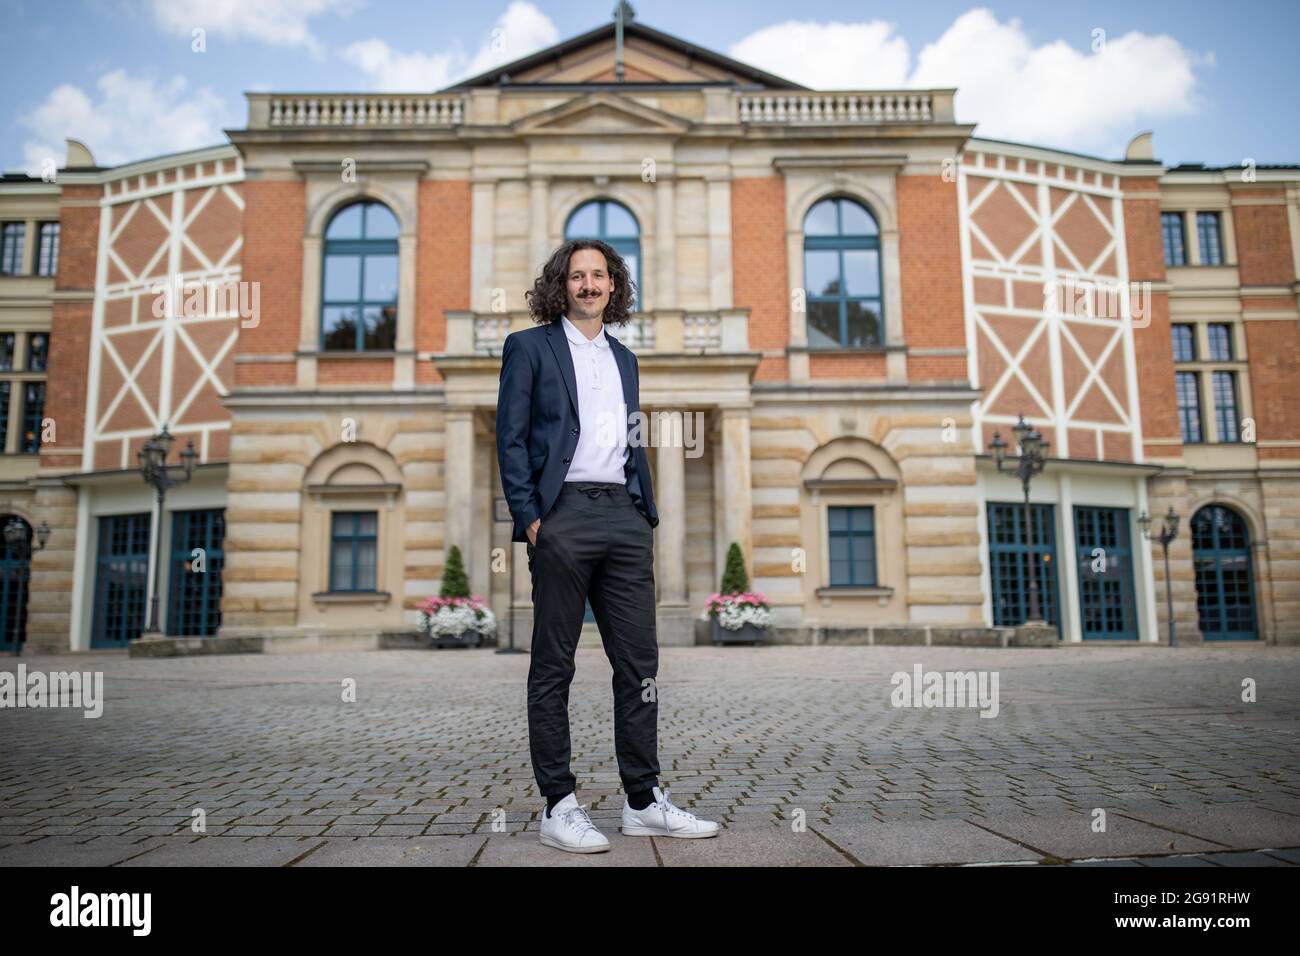 Bayreuth, Germany. 23rd July, 2021. The director Valentin Schwarz stands in  front of the Festspielhaus. The "Ring" director Schwarz, whose production  of the "Ring des Nibelungen" was supposed to premiere in 2020